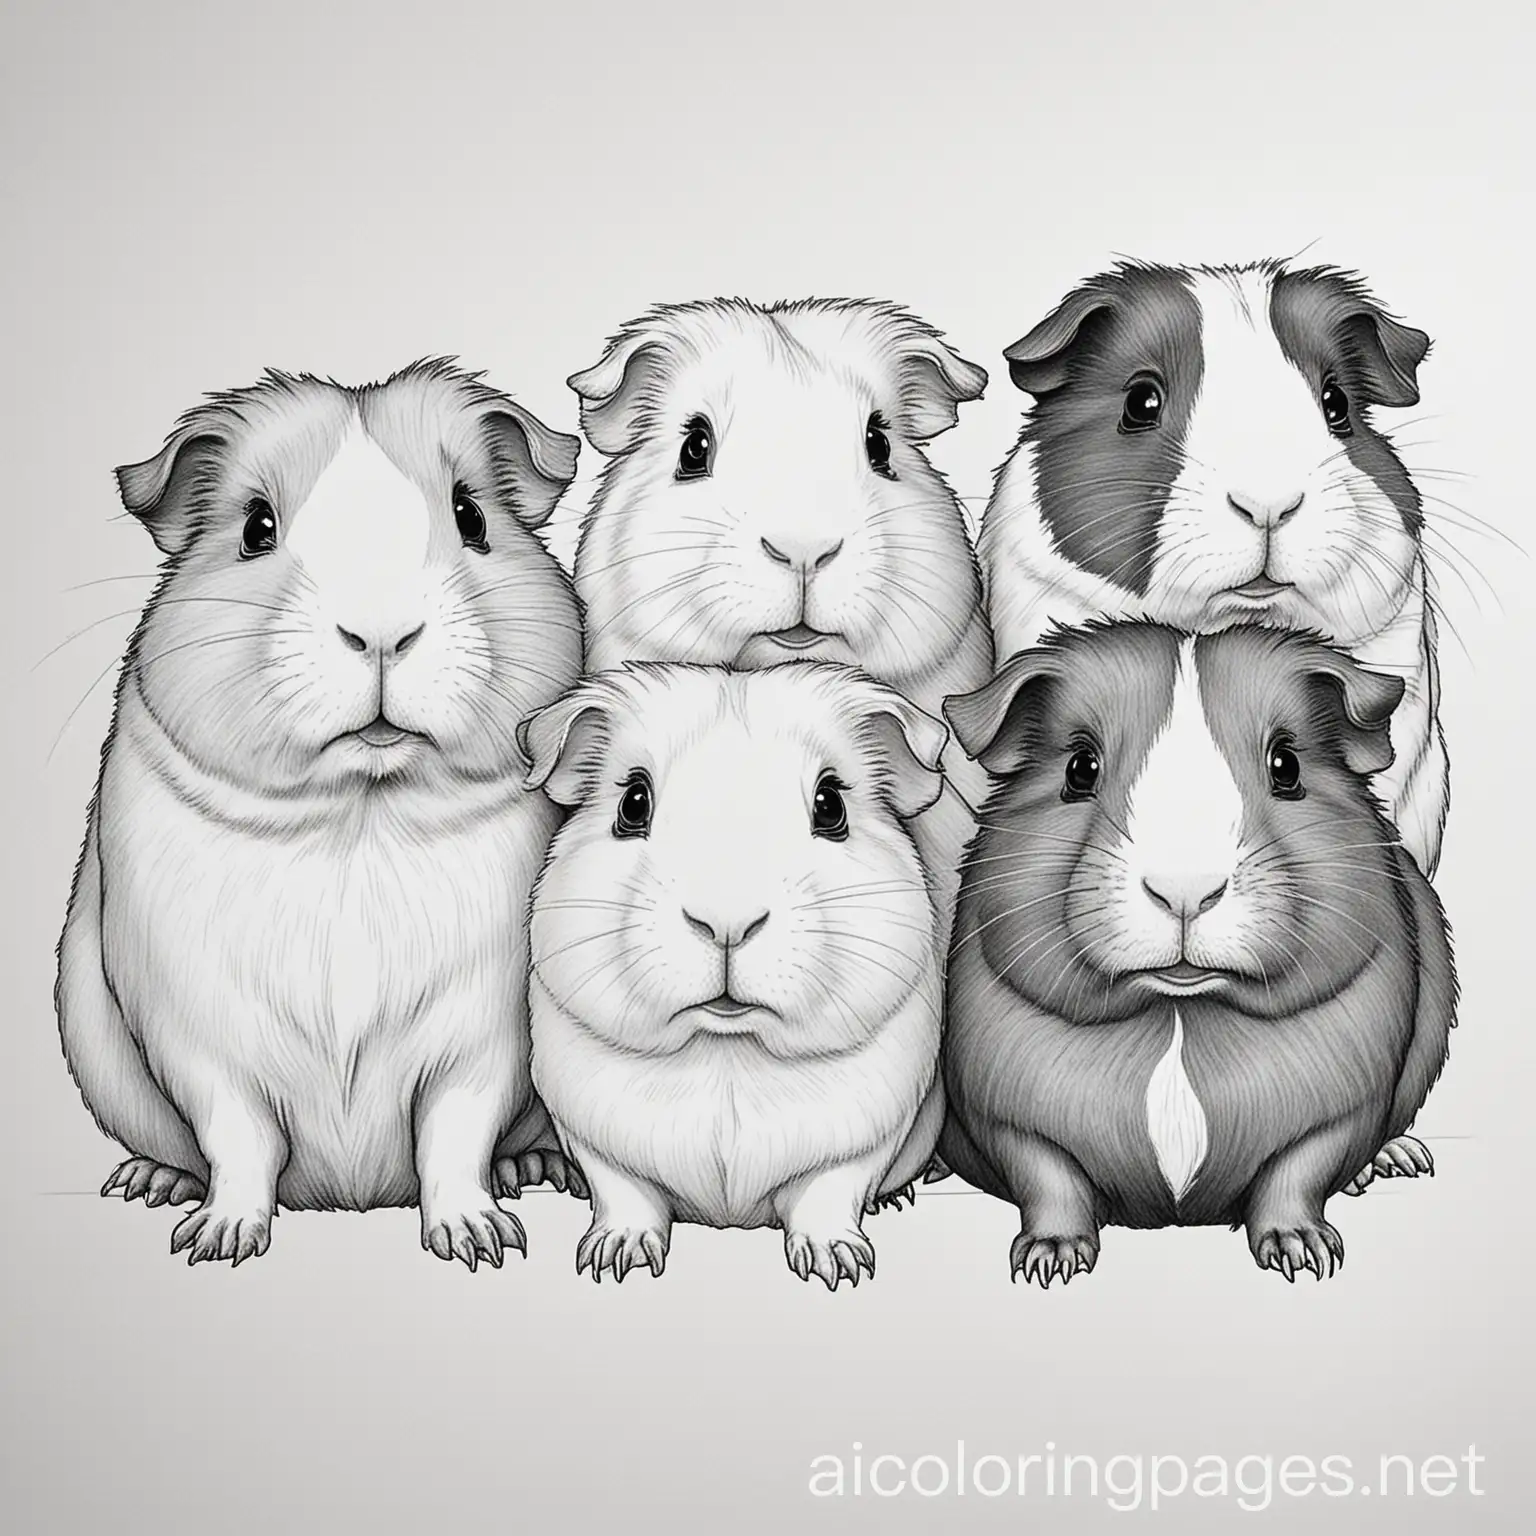 guinea pigs, Coloring Page, black and white, line art, white background, Simplicity, Ample White Space. The background of the coloring page is plain white to make it easy for young children to color within the lines. The outlines of all the subjects are easy to distinguish, making it simple for kids to color without too much difficulty